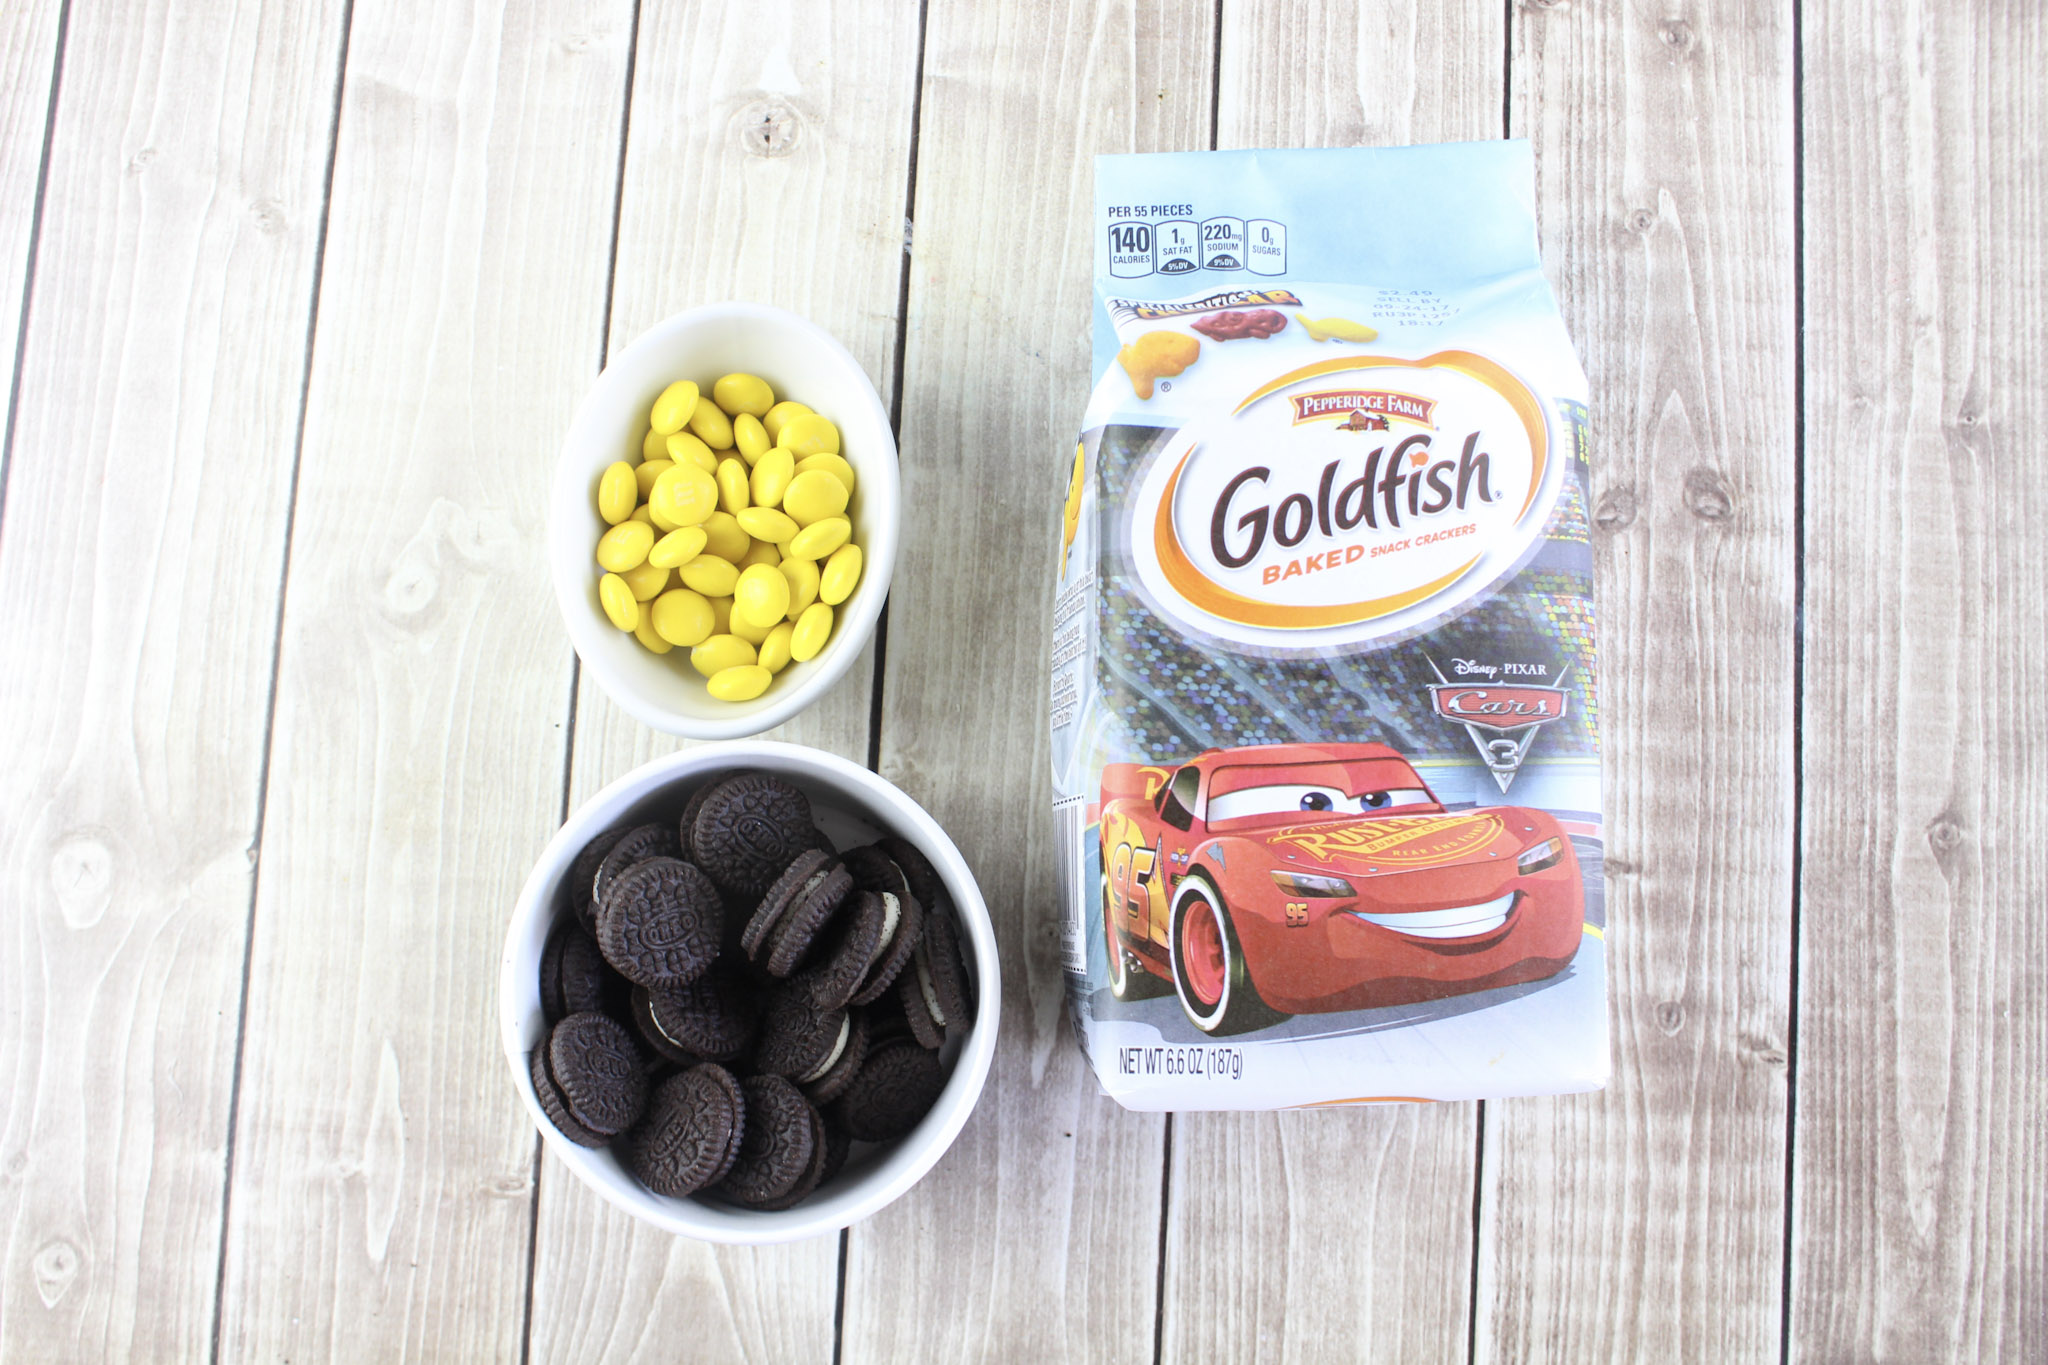 Ready to watch Disney's Cars 3? Make this simple Disney Cars Snack Mix and get ready to enjoy the movie. The kids will love it. 